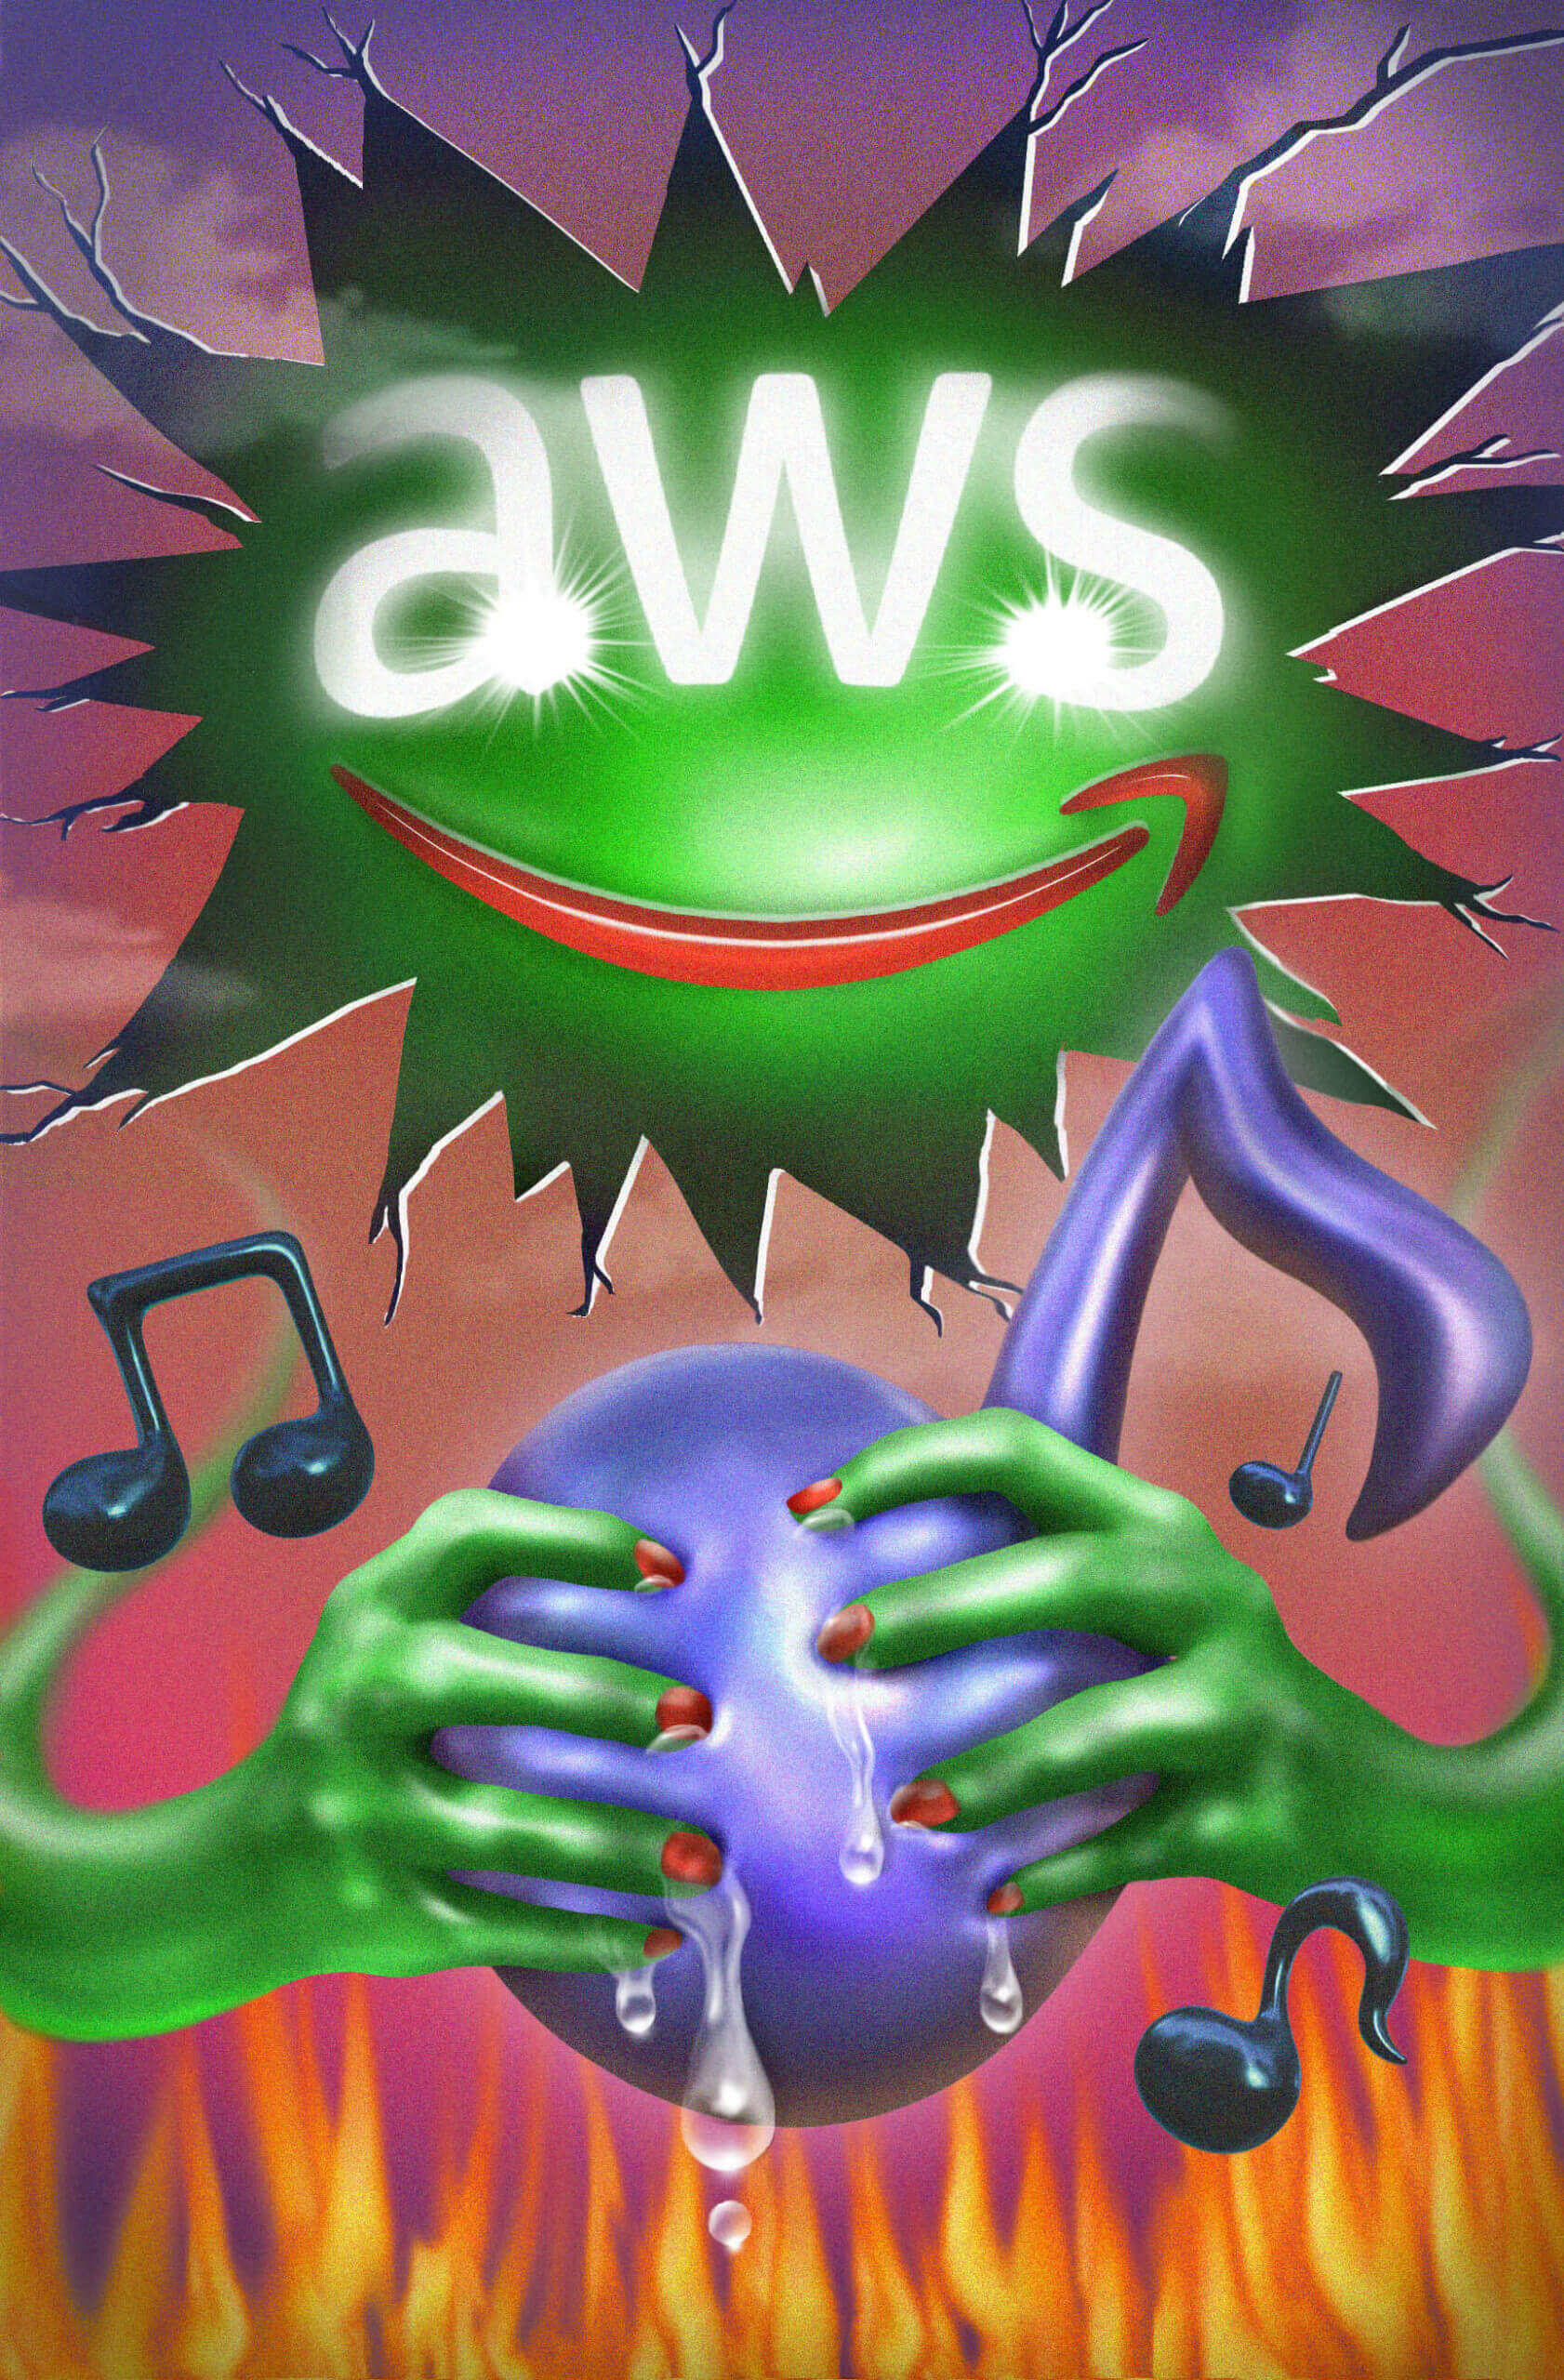 A green monster emerges out of a cracked hole in the sky. “AWS” is written over its eyes, and its mouth is made of Amazon’s arrow logo. The monster’s hands grip and squeeze a musical note over a bed of flames.